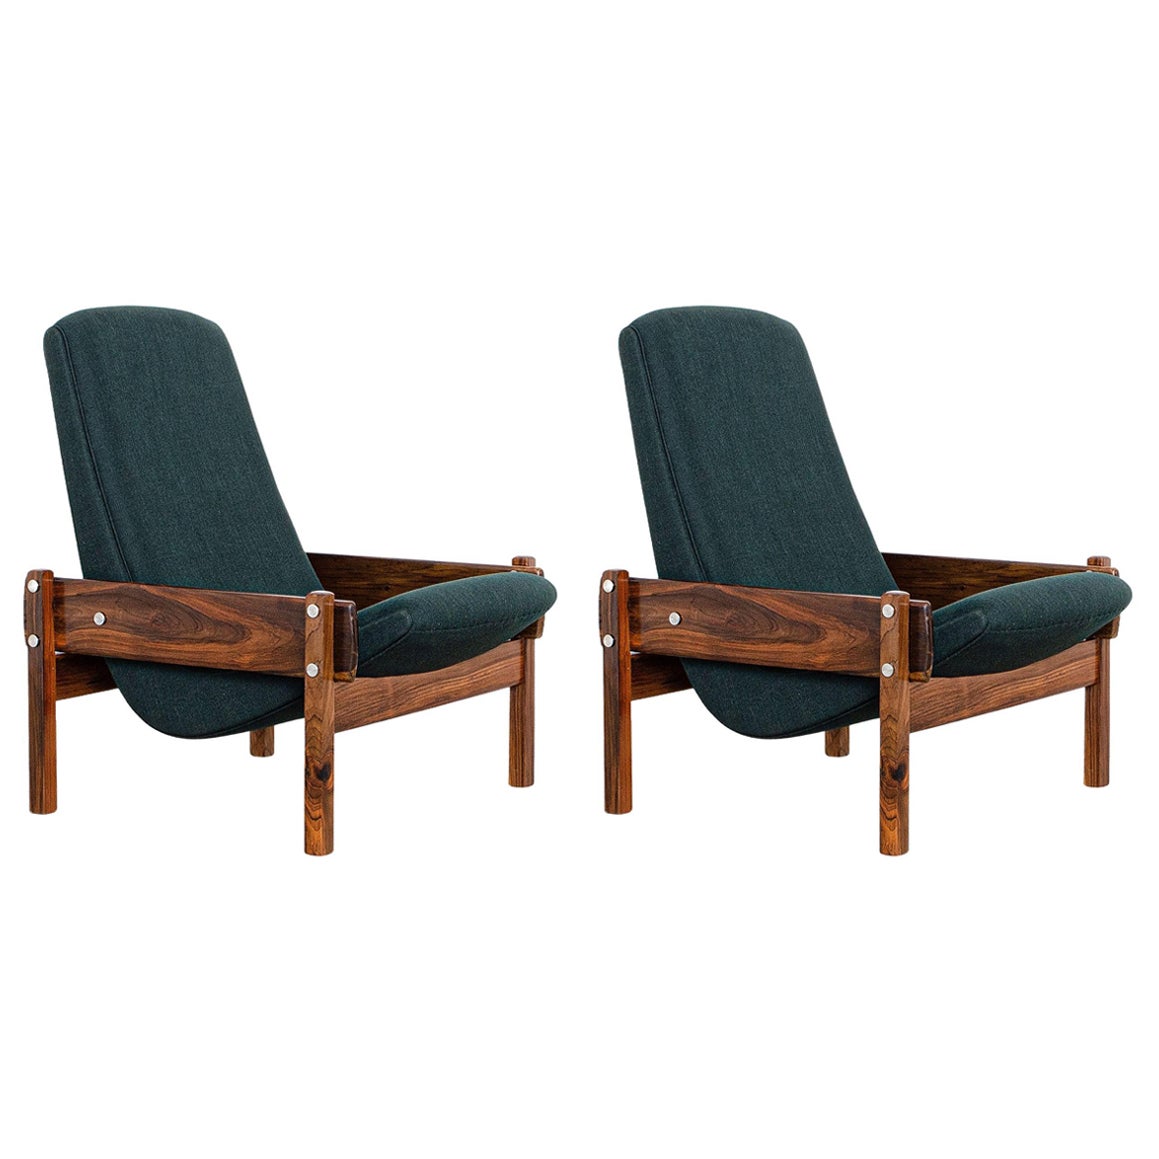 Pair of Vronka Armchairs, by Sergio Rodrigues, 1962 Brazilian Mid-Century Modern